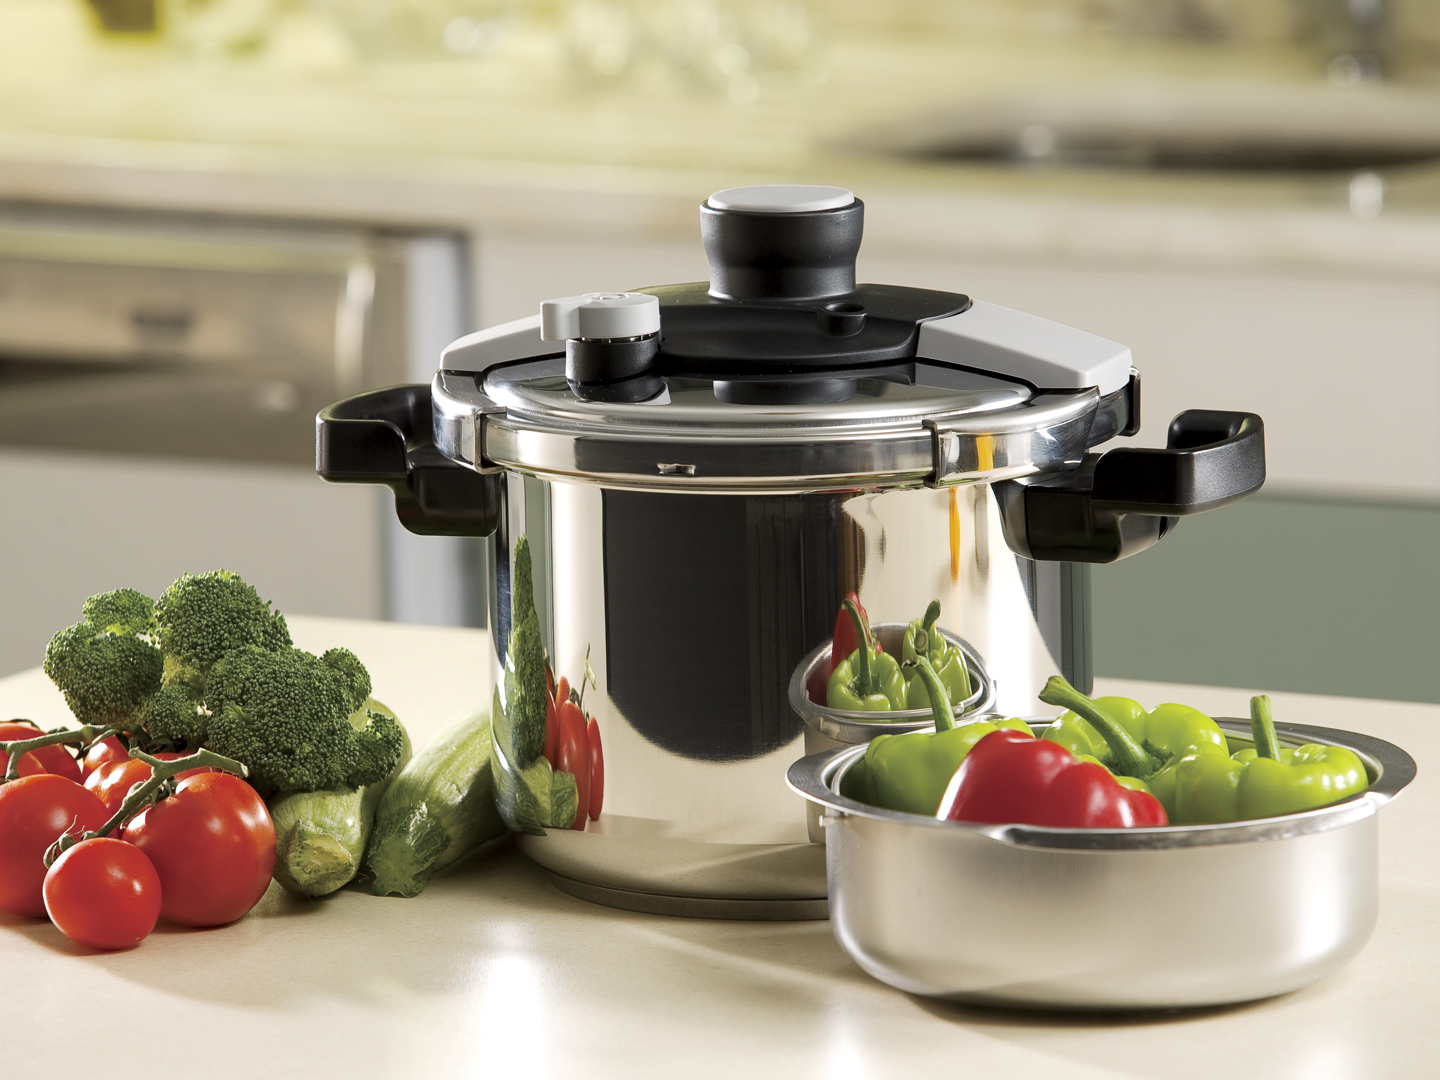 Pressed for Time? Give Pressure Cooking a Try - Food & Nutrition